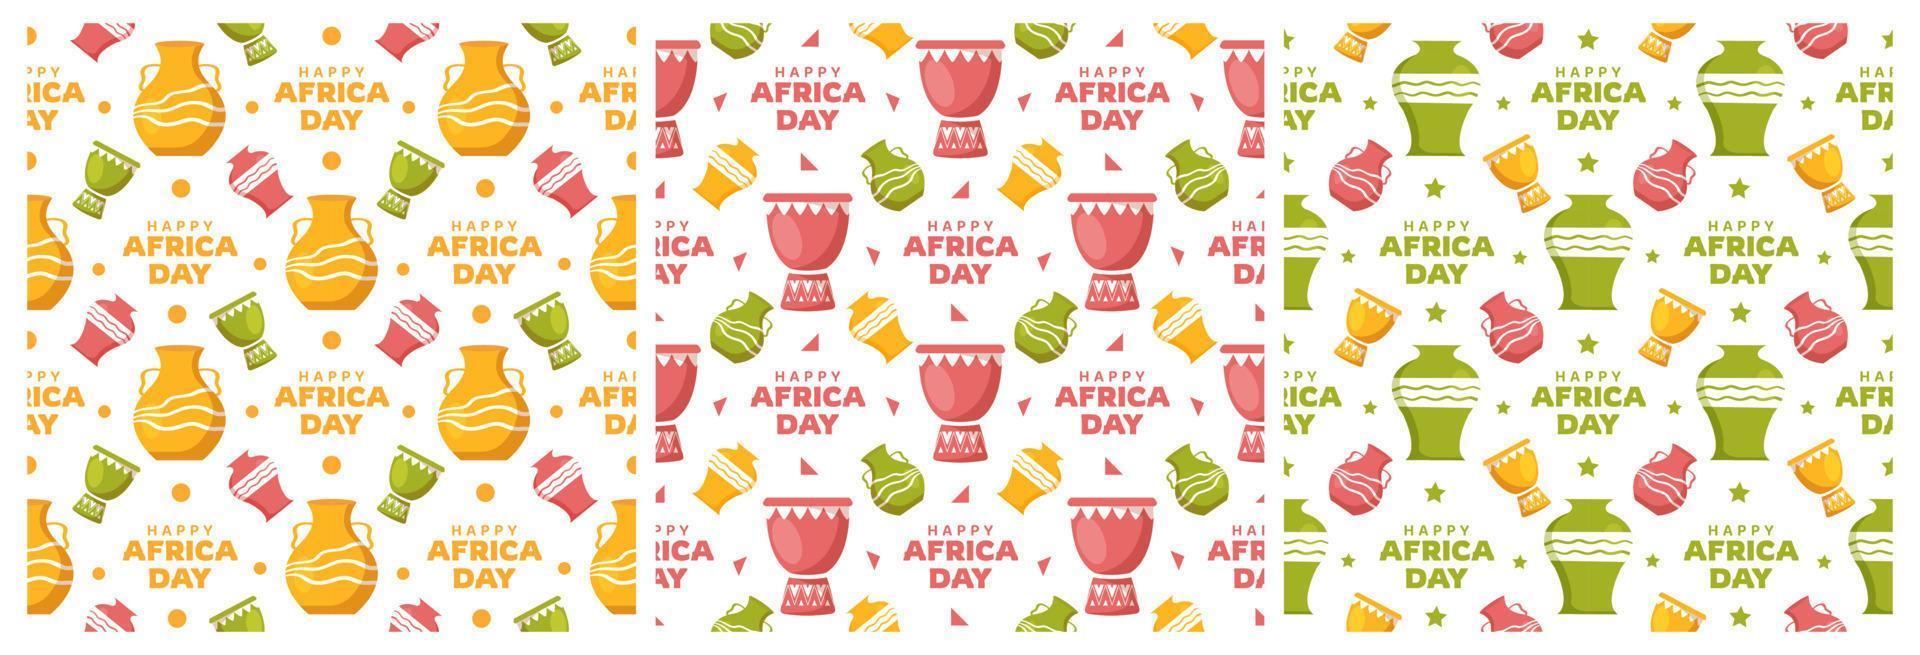 Set of Happy Africa Day Seamless Pattern Design with Culture African Tribal Figures Decoration in Template Hand Drawn Cartoon Flat Illustration vector